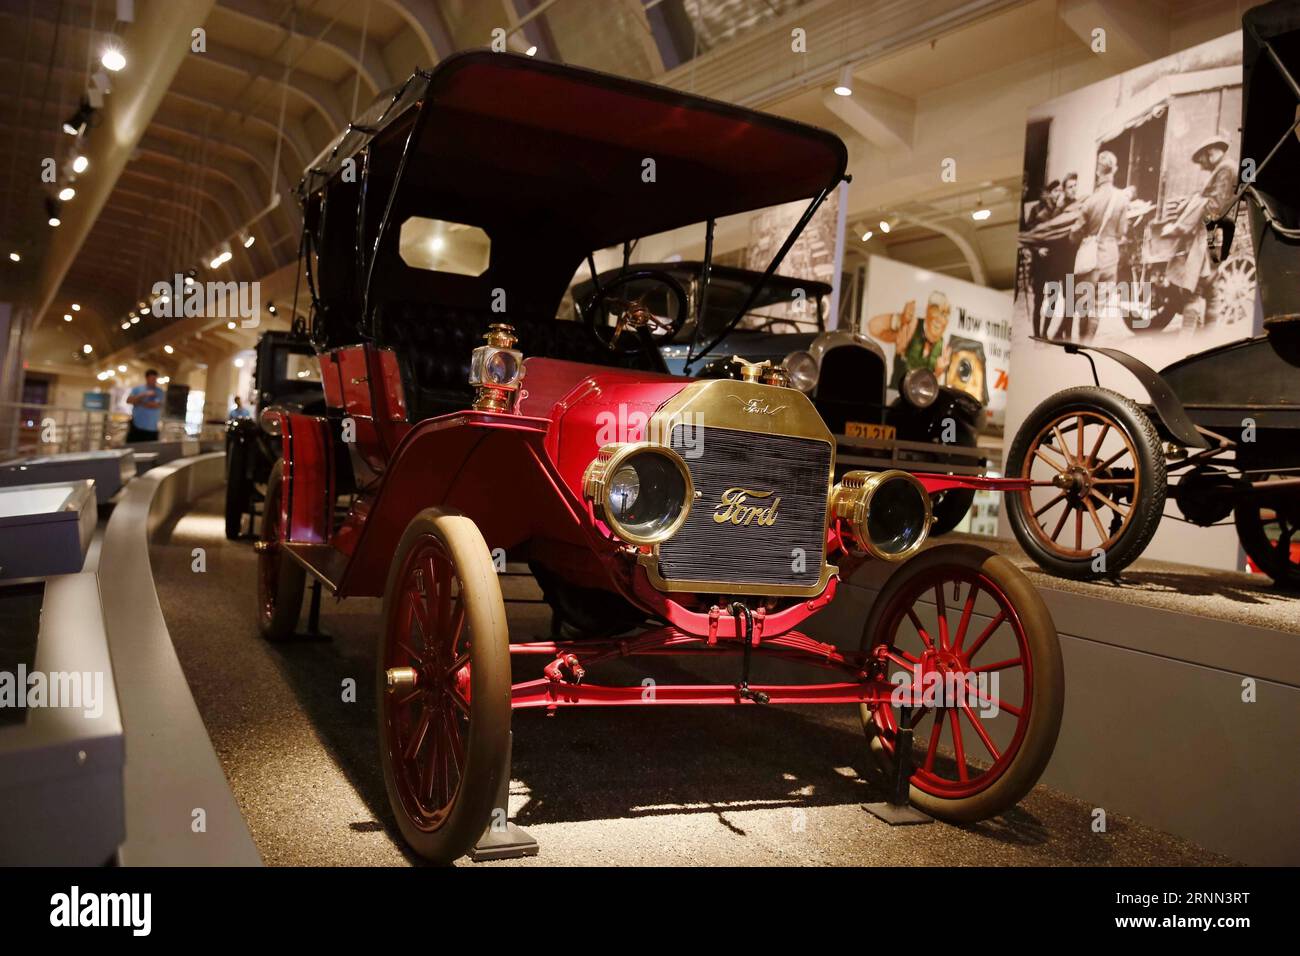 (170623) -- DETROIT, June 23, 2017 -- Photo taken on June 22, 2017 shows a 1909 Ford Model T touring car at the Henry Ford Museum of American Innovation, in Detroit, the United States. Wang Ping) (dtf) U.S.-DETROIT-HENRY FORD MUSEUM wangping PUBLICATIONxNOTxINxCHN   Detroit June 23 2017 Photo Taken ON June 22 2017 Shows a 1909 Ford Model T Touring Car AT The Henry Ford Museum of American Innovation in Detroit The United States Wang Ping dtf U S Detroit Henry Ford Museum Wangping PUBLICATIONxNOTxINxCHN Stock Photo